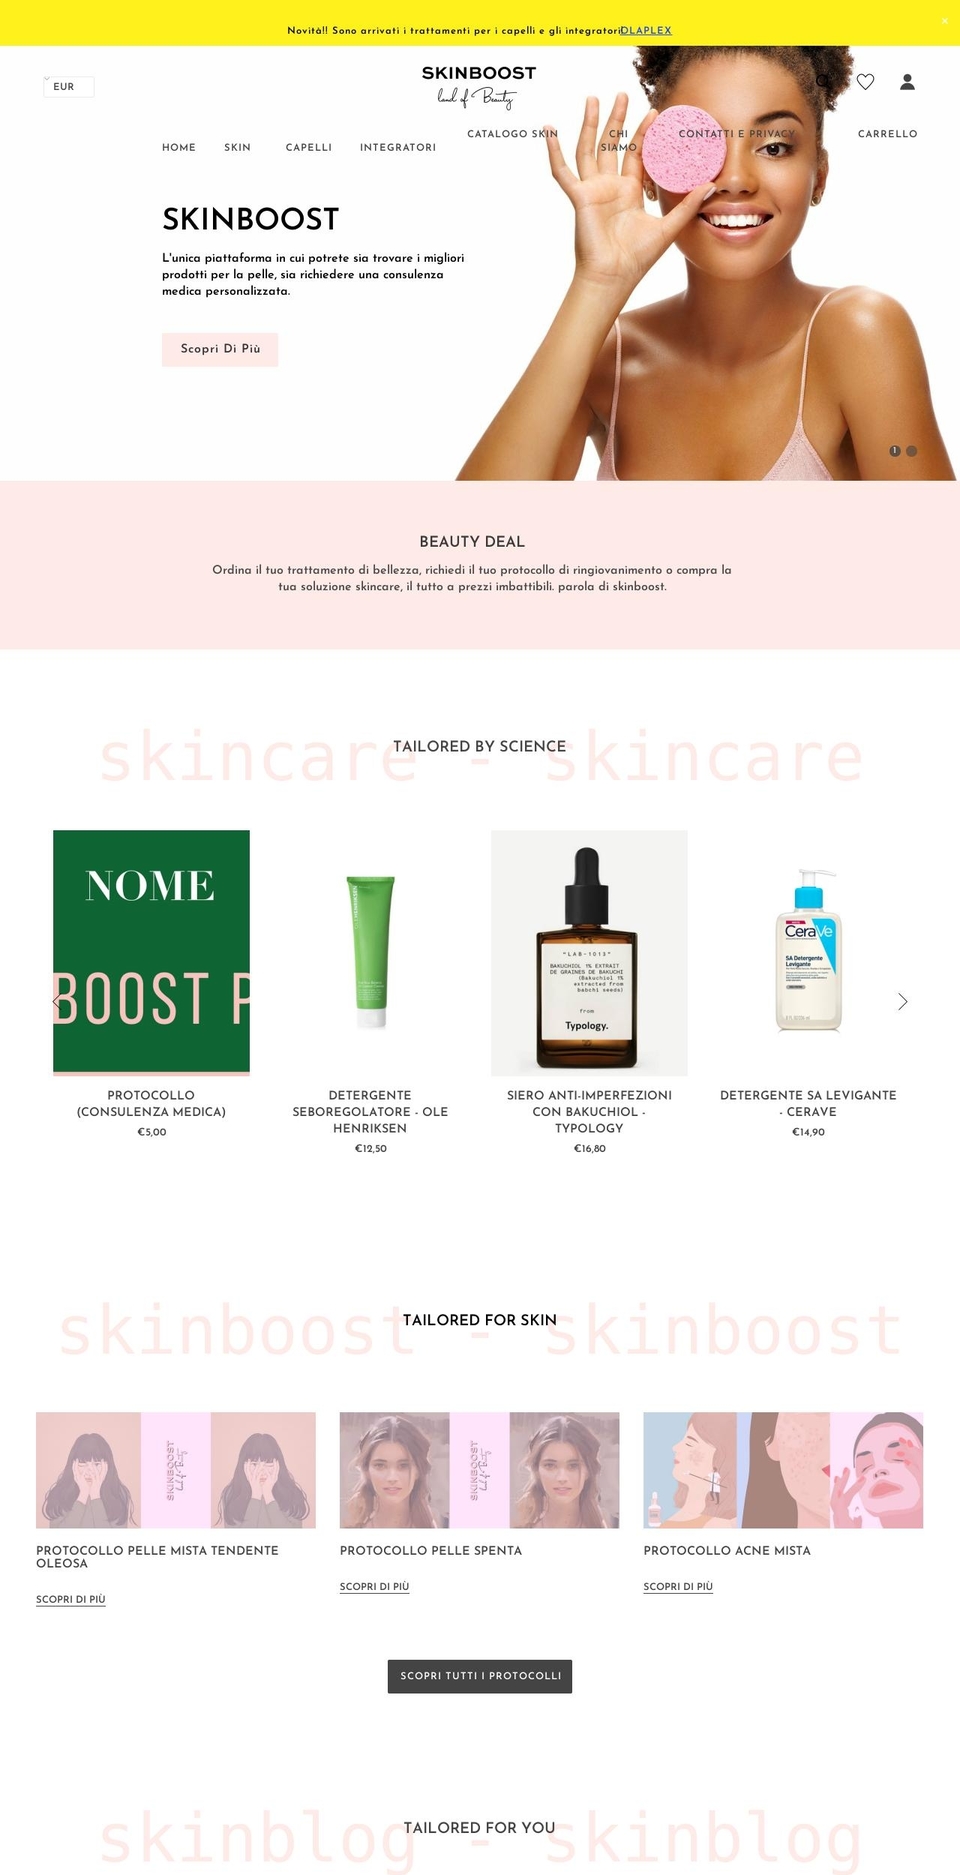 Beaux Shopify theme site example skinboost.it